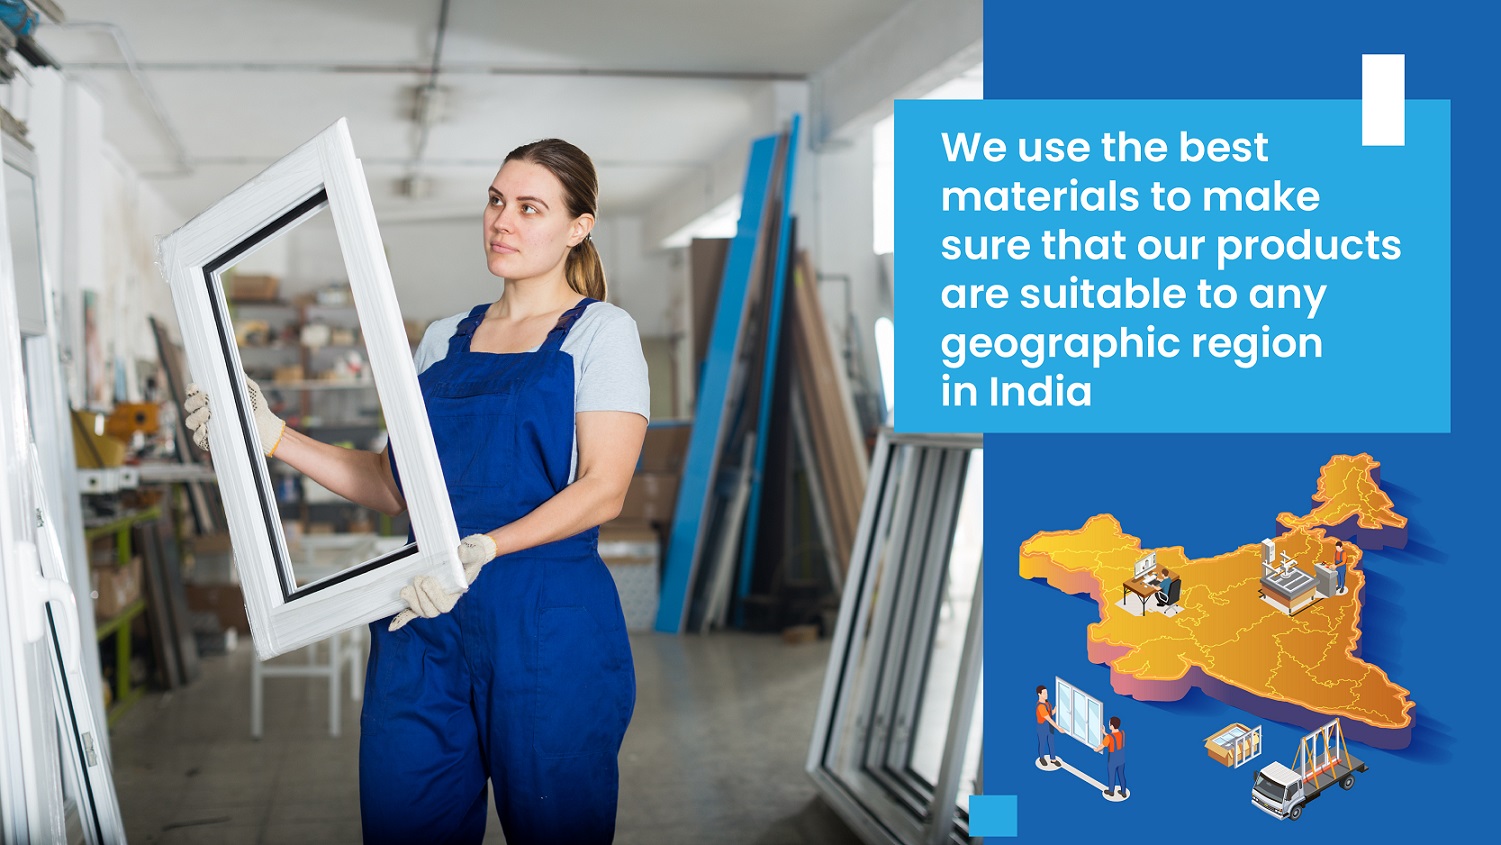 We use the best materials to make sure that our products are suitable to any geographic region in India